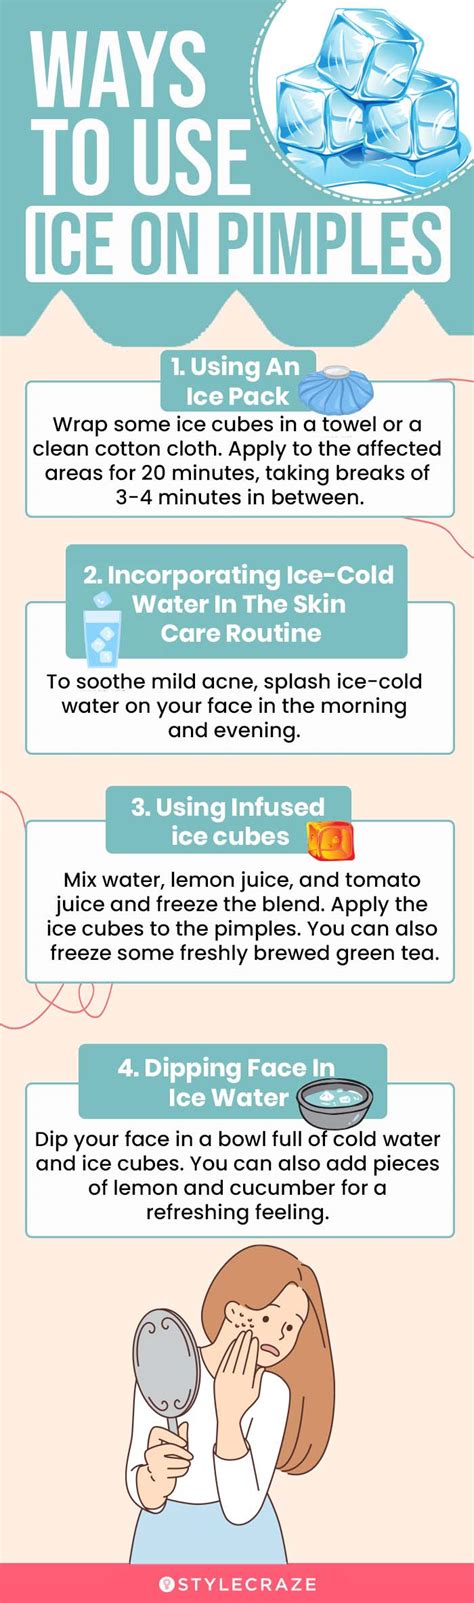 Does putting ice on cystic acne help?